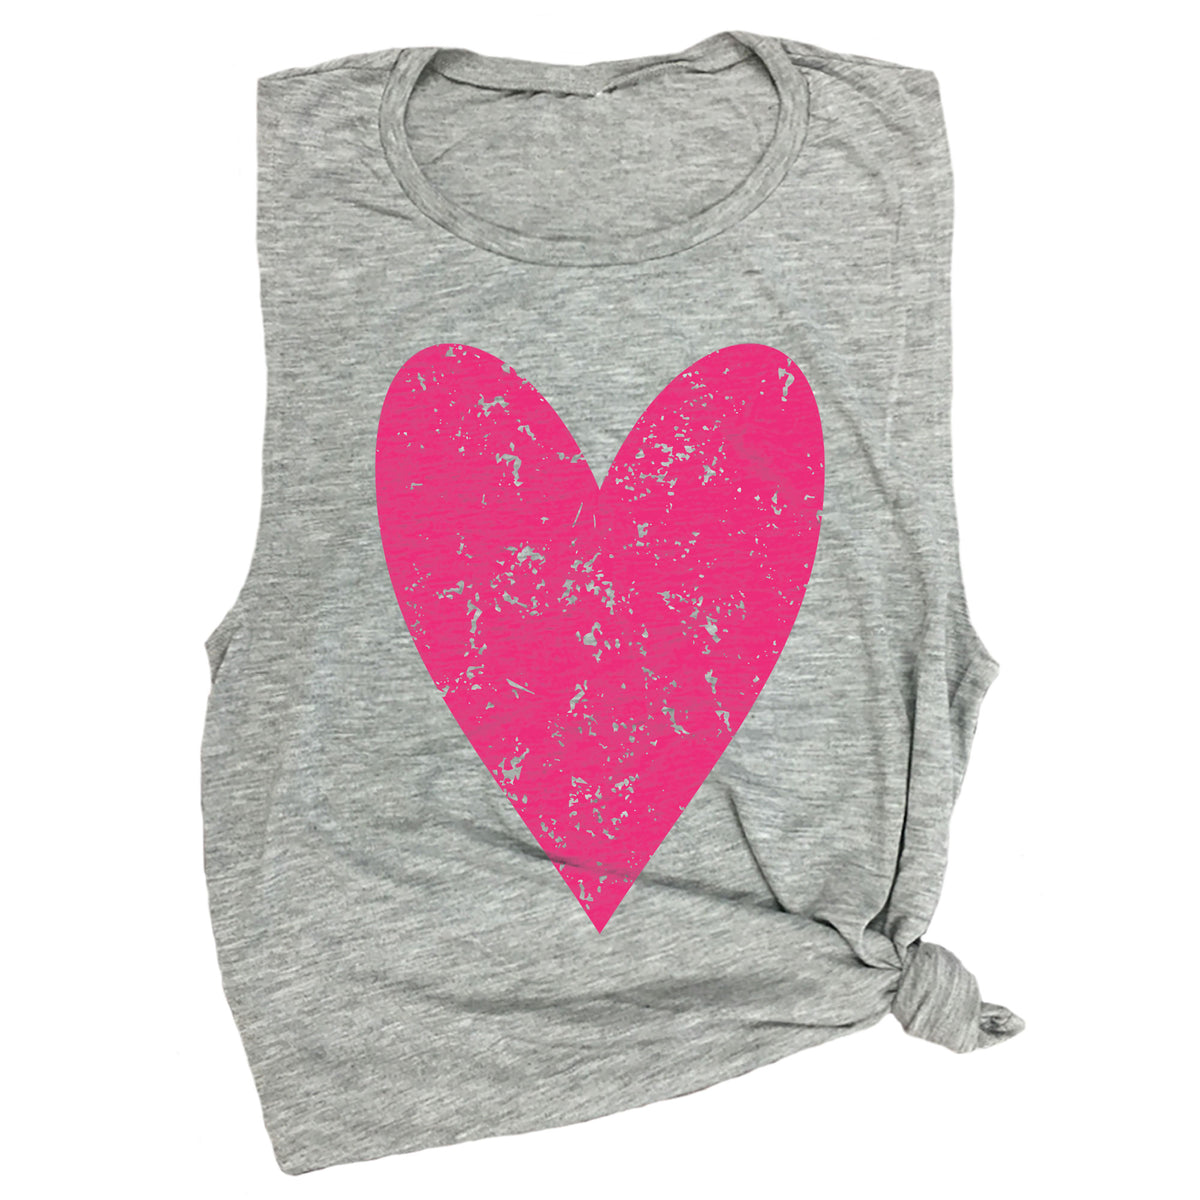 Distressed Heart Muscle Tee